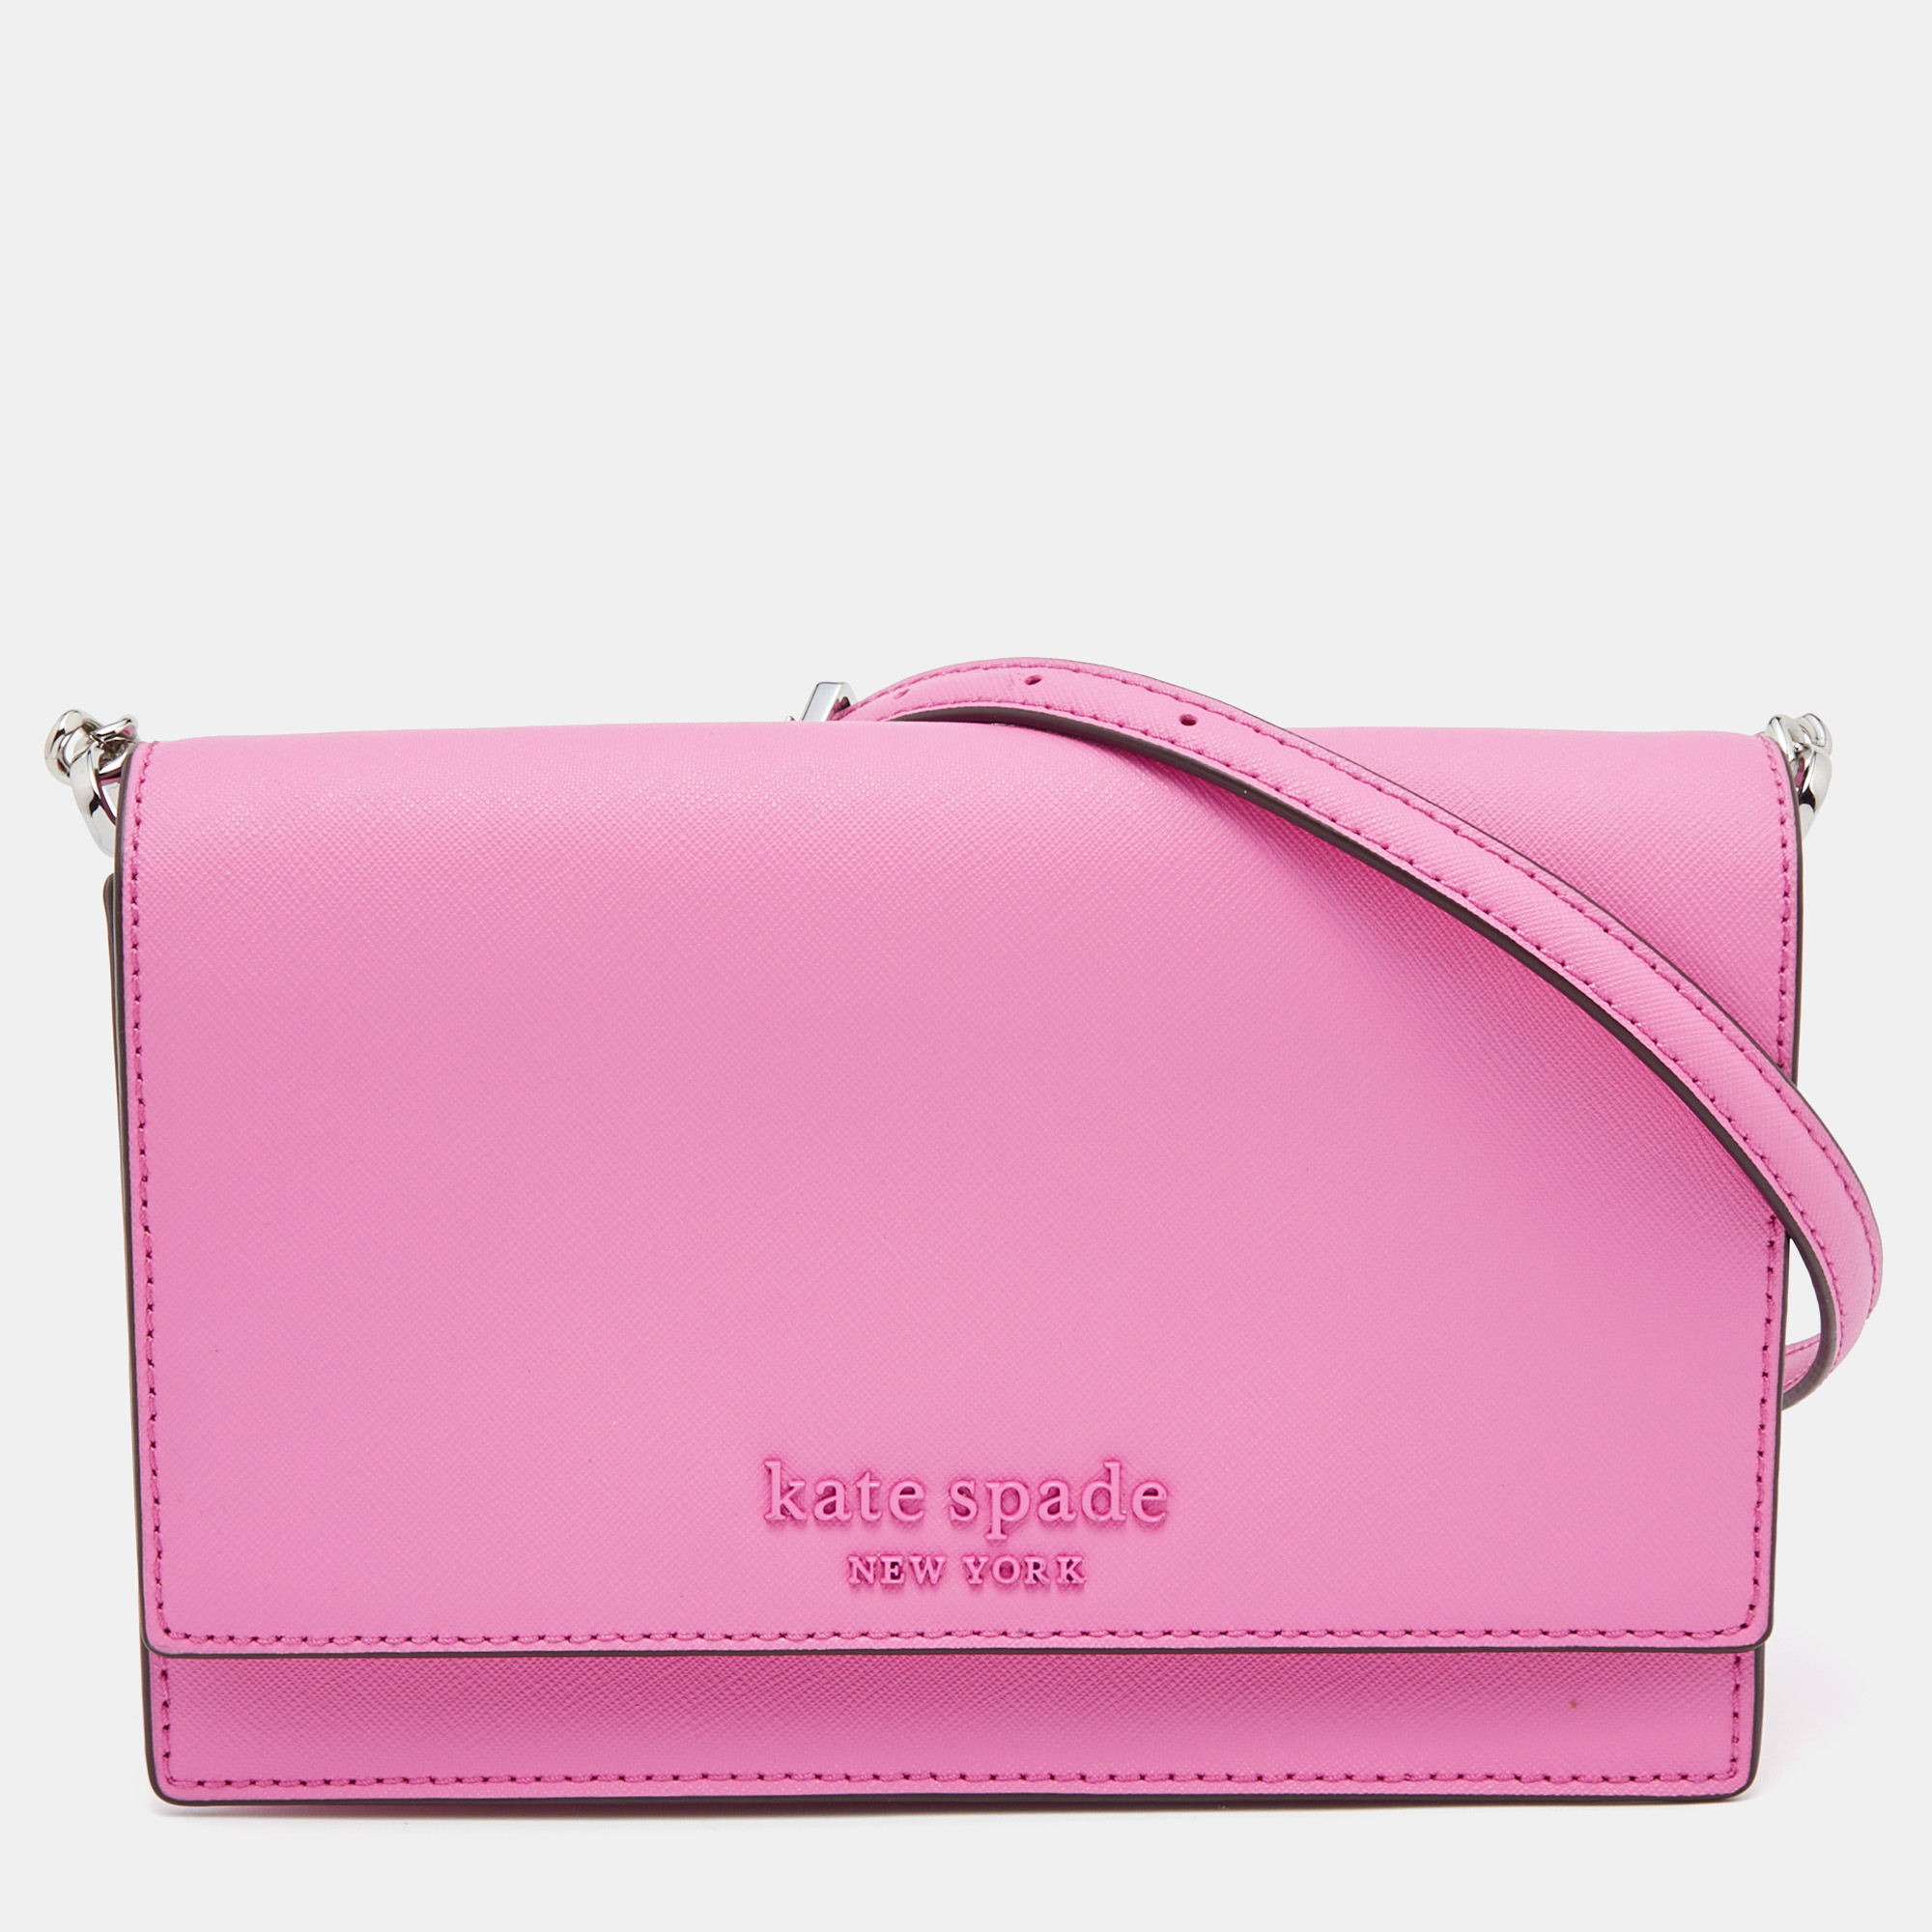 Pre-owned Kate Spade Pink Leather Convertible Crossbody Bag